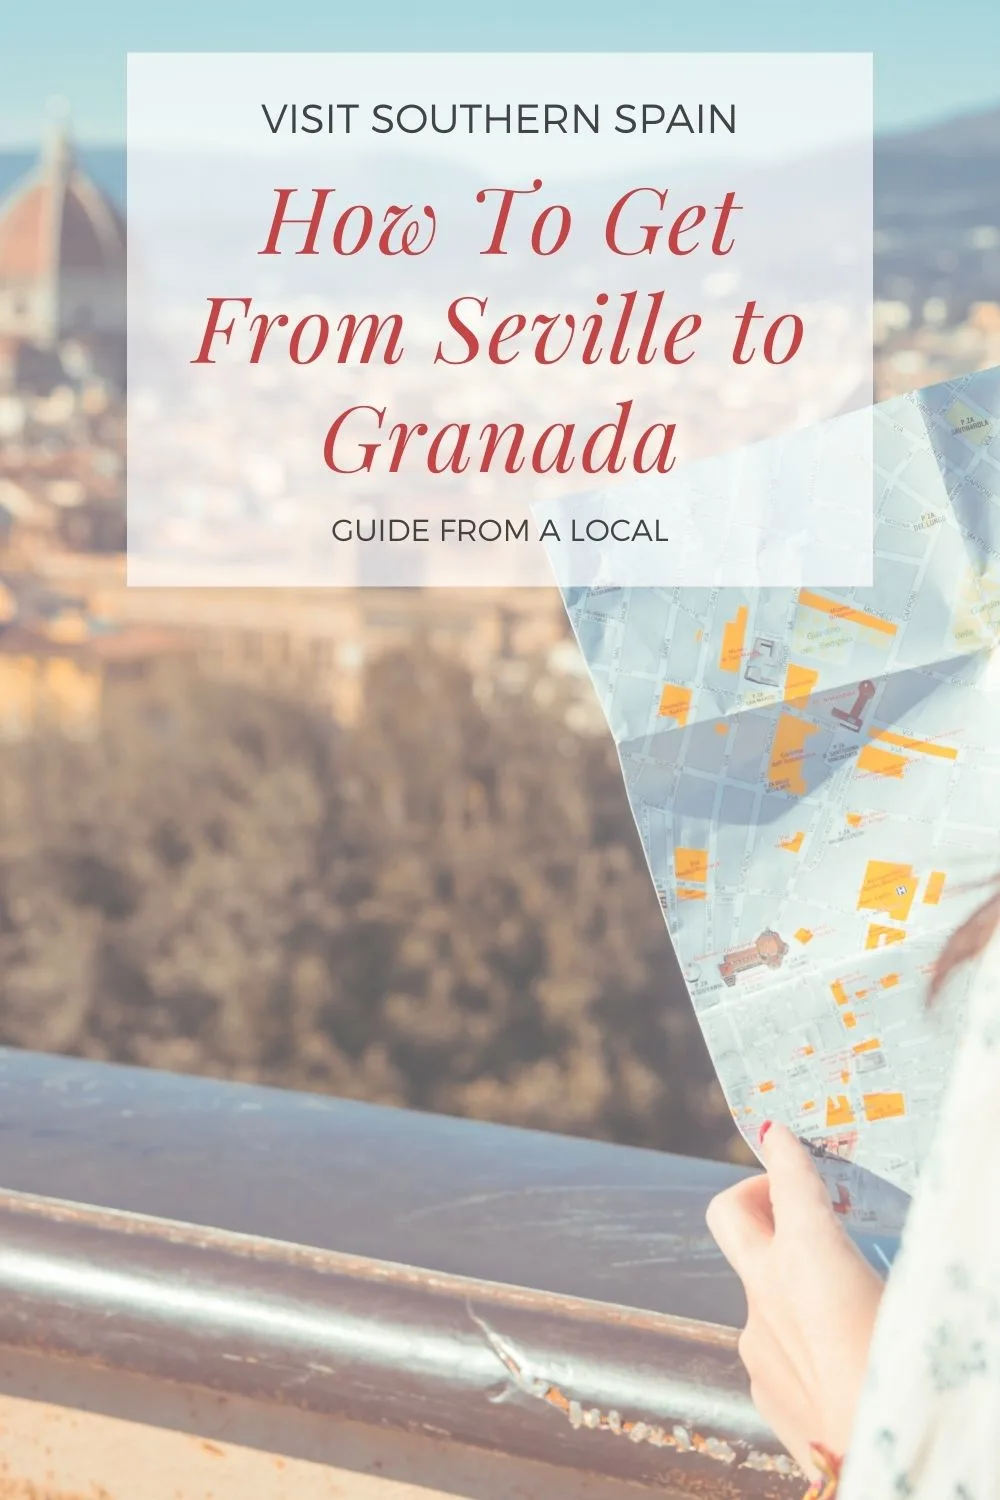 Do you want to travel from Seville to Granada and don't know how to start? We've prepared for you an easy to follow travel guide that will take you from Seville to Granada without having to worry about anything. You can read about how to get to Granada, what's the best option for you as well as other tips that will help you during your travel. Whether it's train, bus or car, we'll tell you exactly how to get from Seville to Granada. #sevilletogranada #howtogettoseville #seville #granada #travel